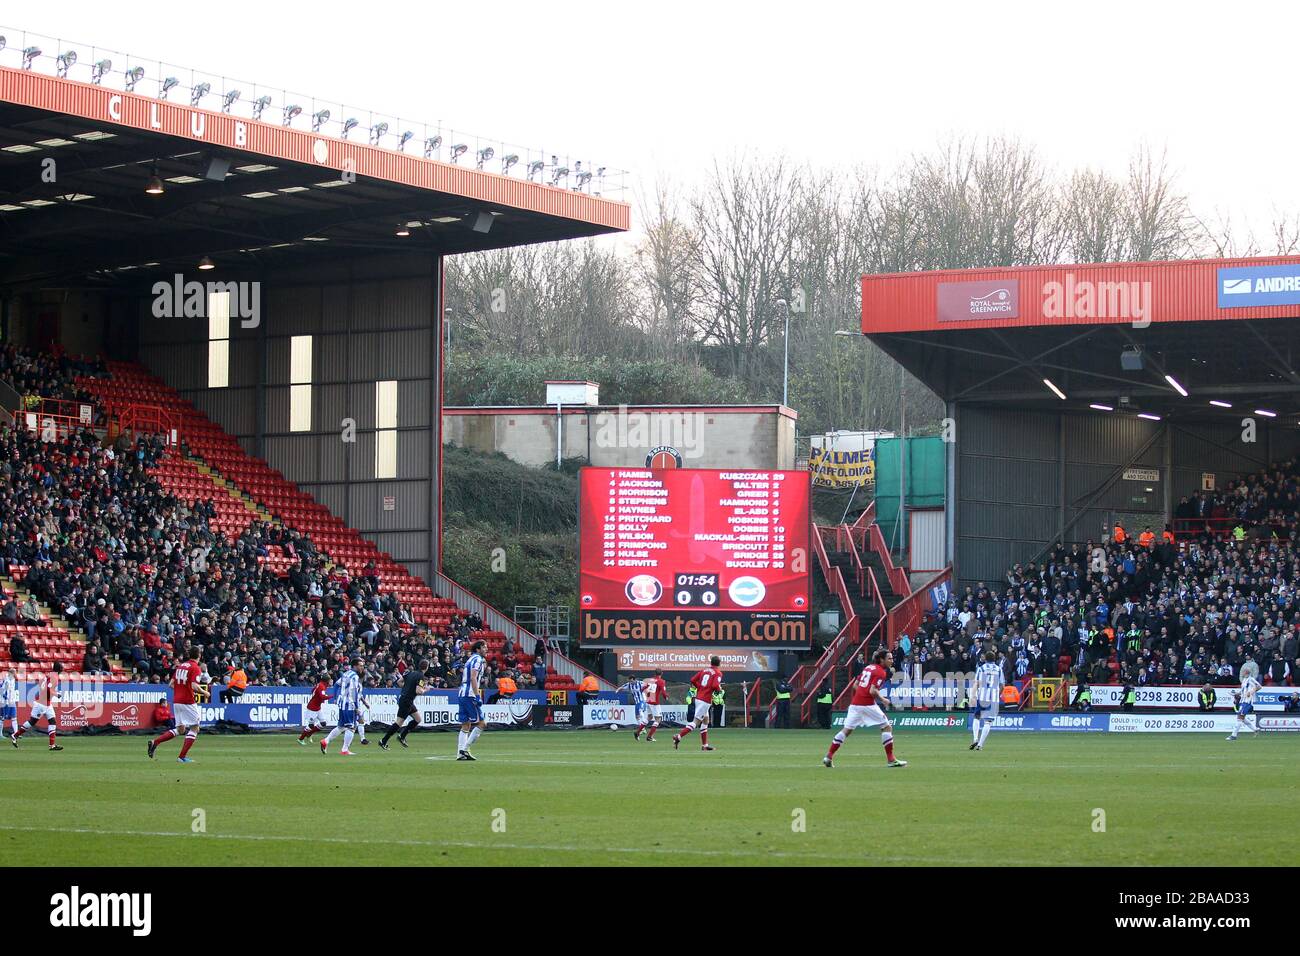 The giant screen shows the team sheet as the action takes place on the pitch Stock Photo